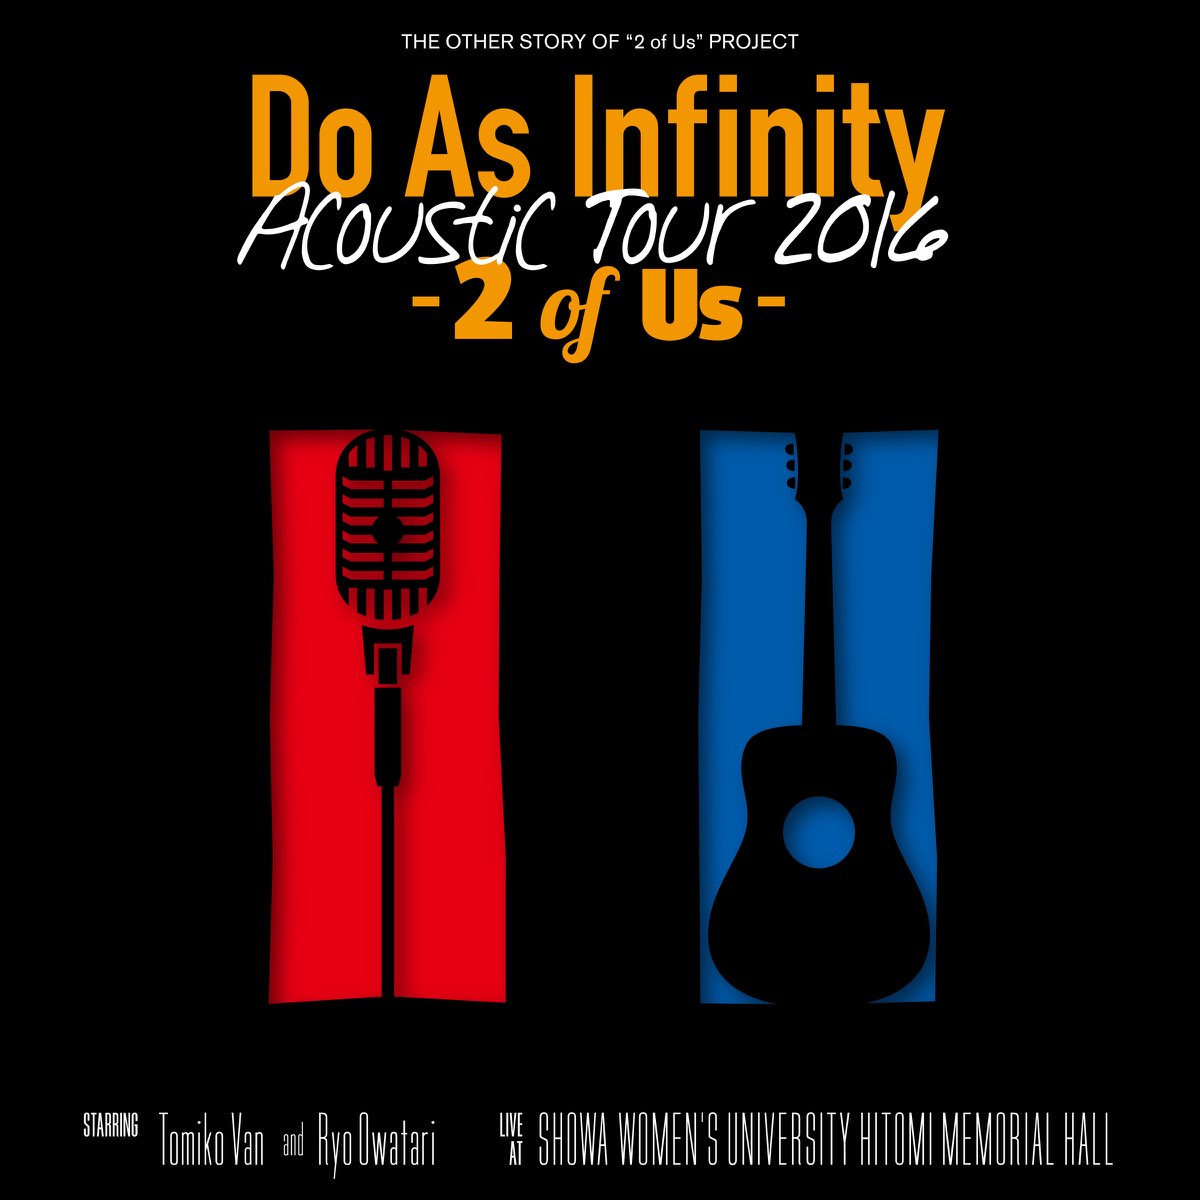 Do As Infinity Acoustic Tour 2016 - 2 of Us by Do As Infinity on Apple Music